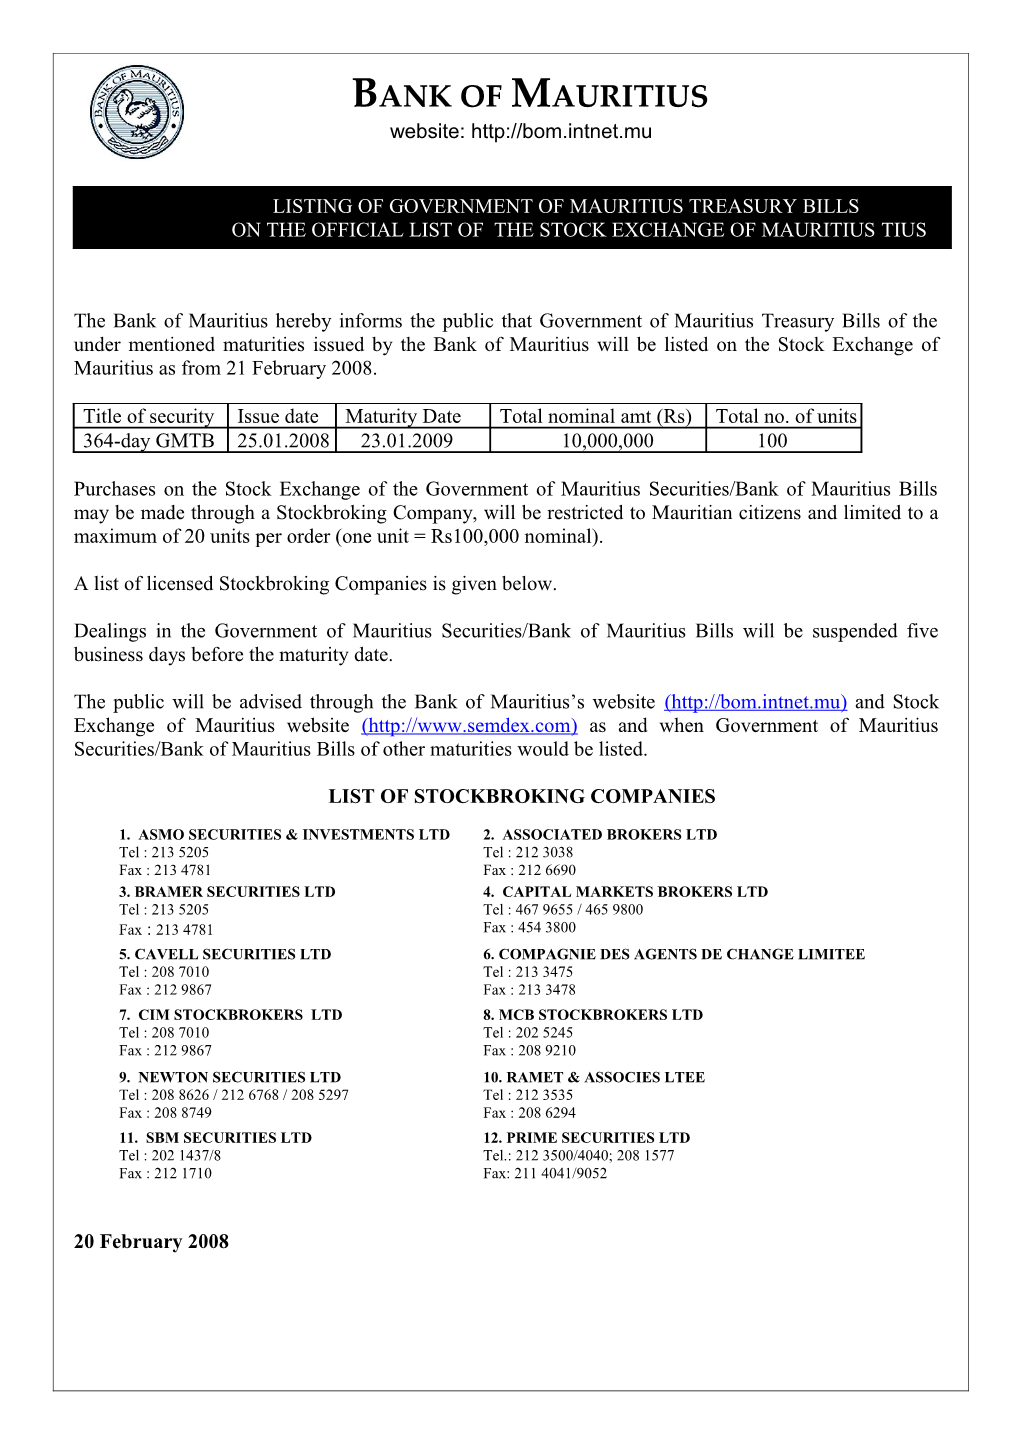 A List of Licensed Stockbroking Companies Is Given Below